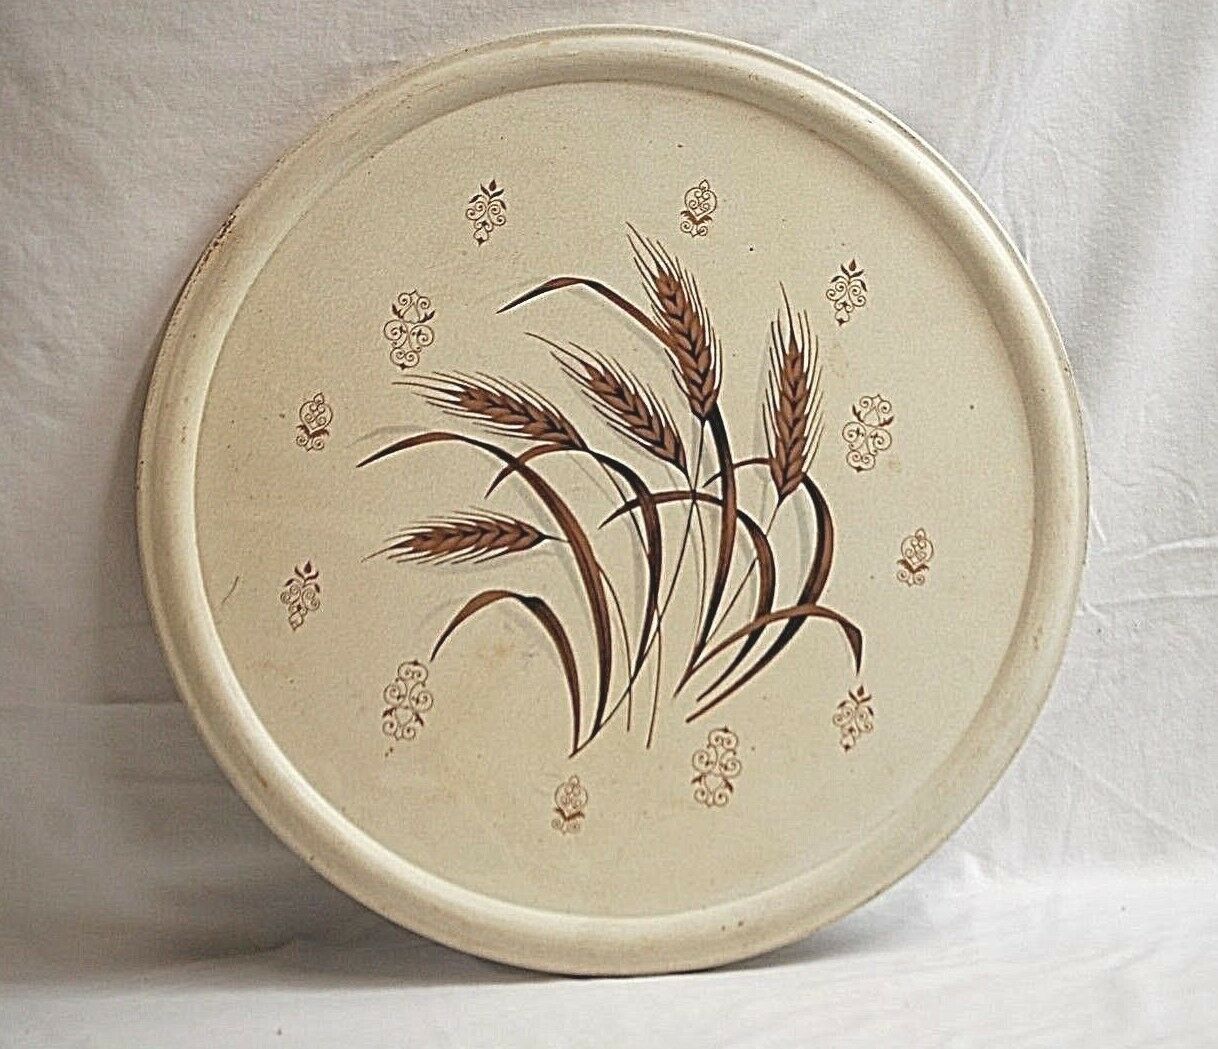 Primary image for Old Vintage Round Metal Table Top Tray w Wheat Fleur-de-lis Pattern Wall Hanging